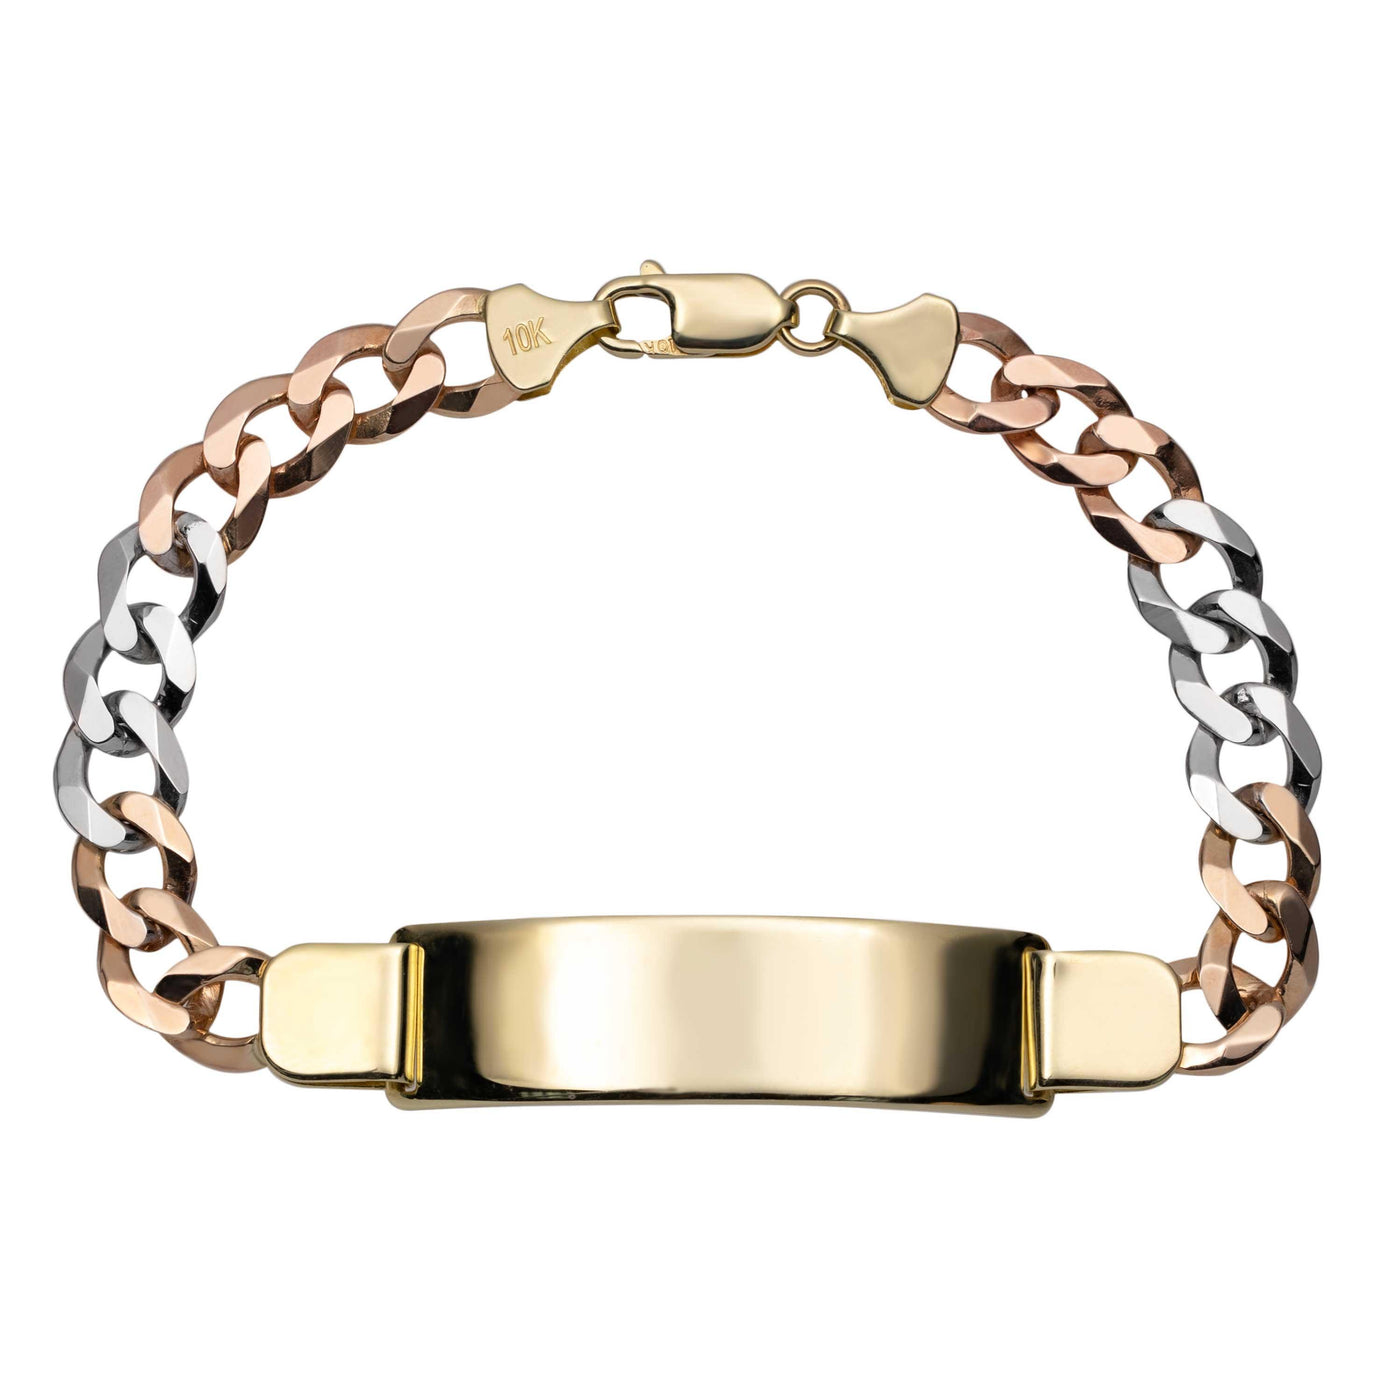 Women's Miami Curb Link ID Bracelet 10K Tri-Color Gold - Solid - bayamjewelry